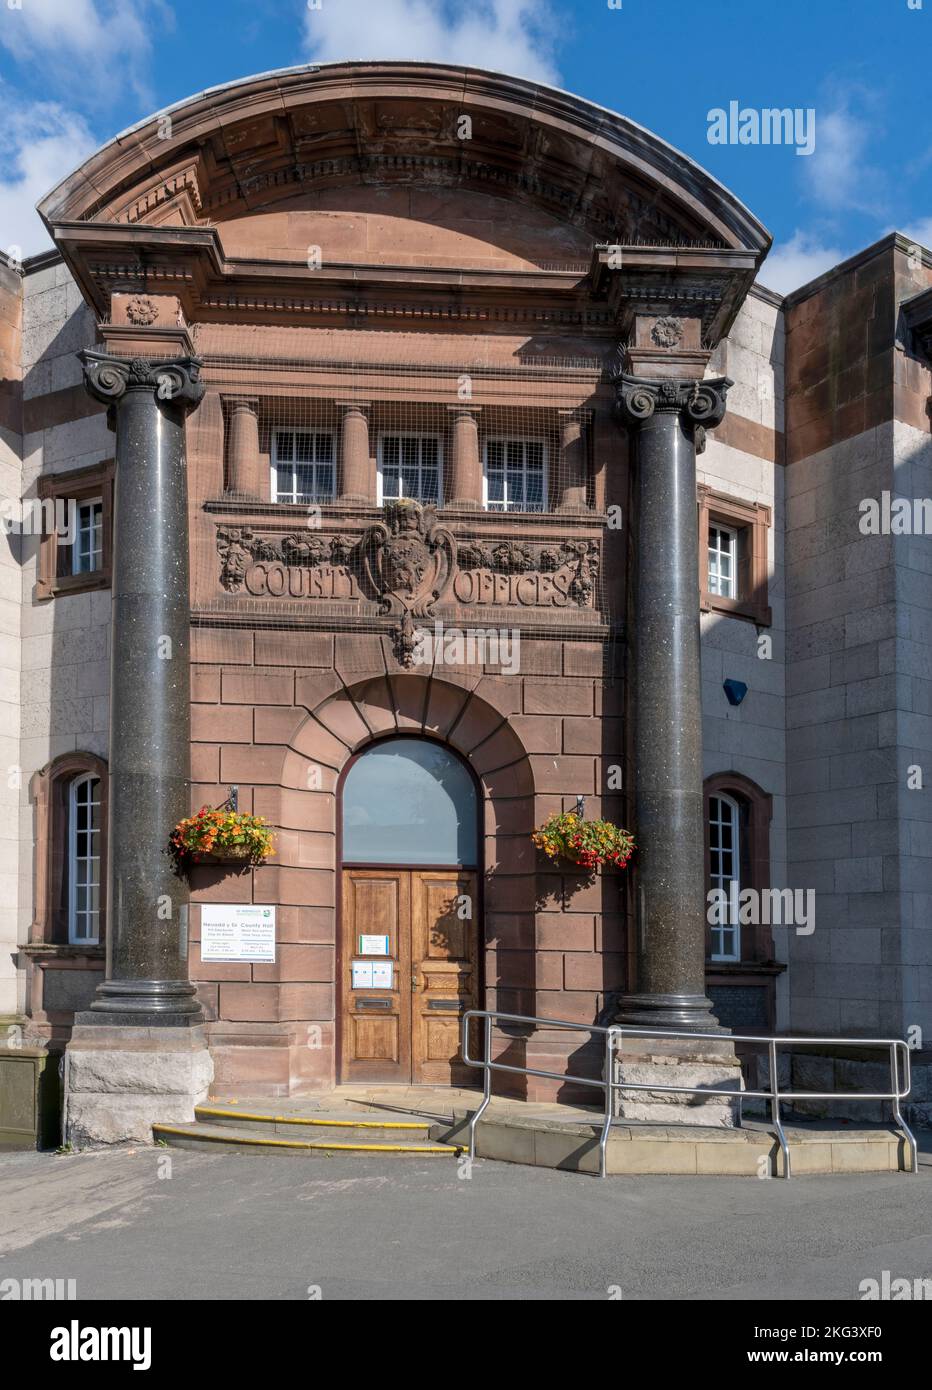 Denbighshire County Council Offices - County Hall - Station Road, Ruthin, Denbighshire, Wales, UK - view of the grand entrance Stock Photo